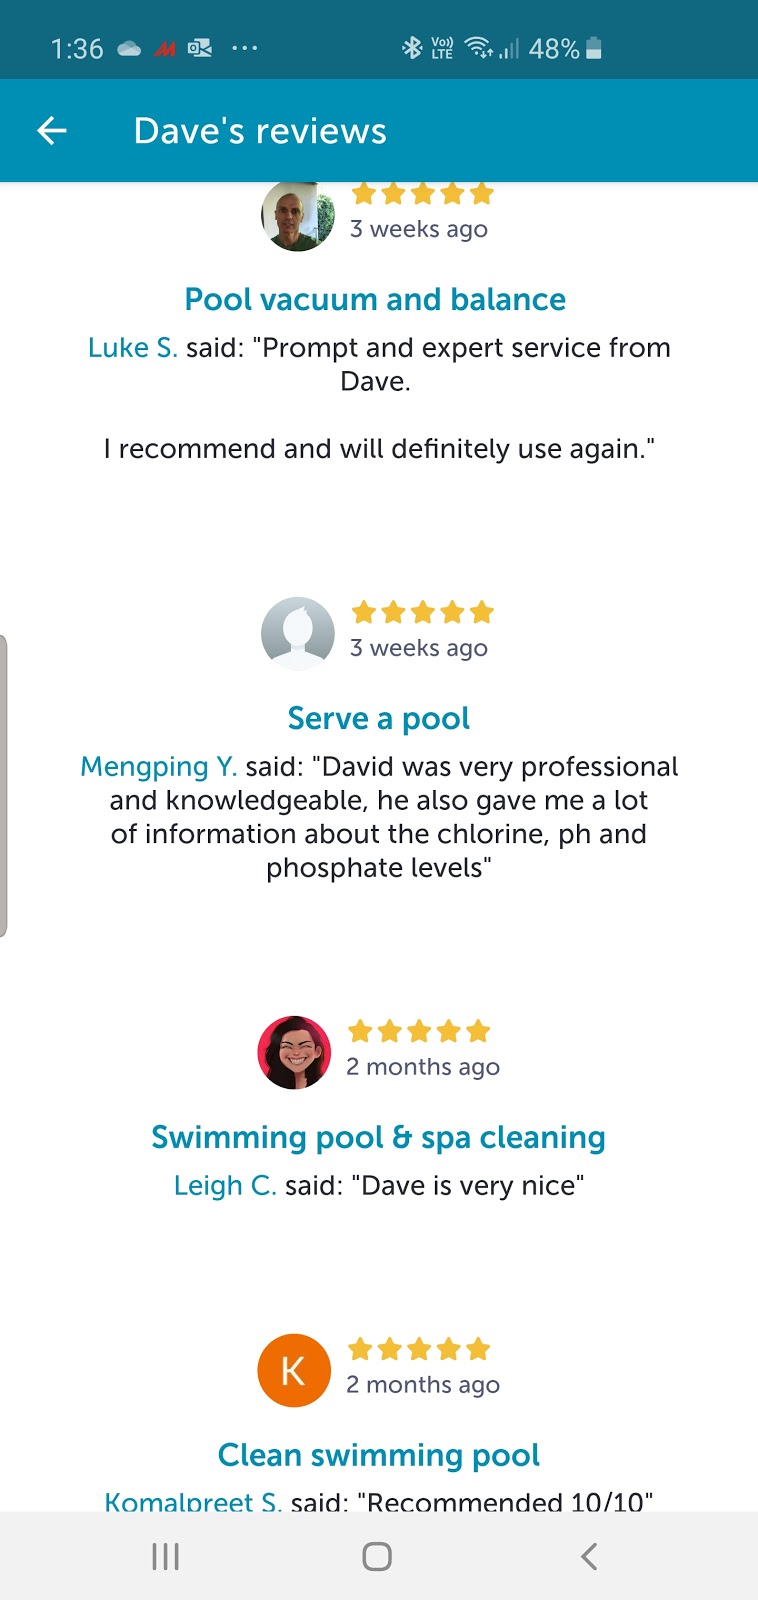 Poolwise |  | Suite 101, 19/102-114 Gladesville Blvd, Patterson Lakes VIC 3197, Australia | 0472771672 OR +61 472 771 672